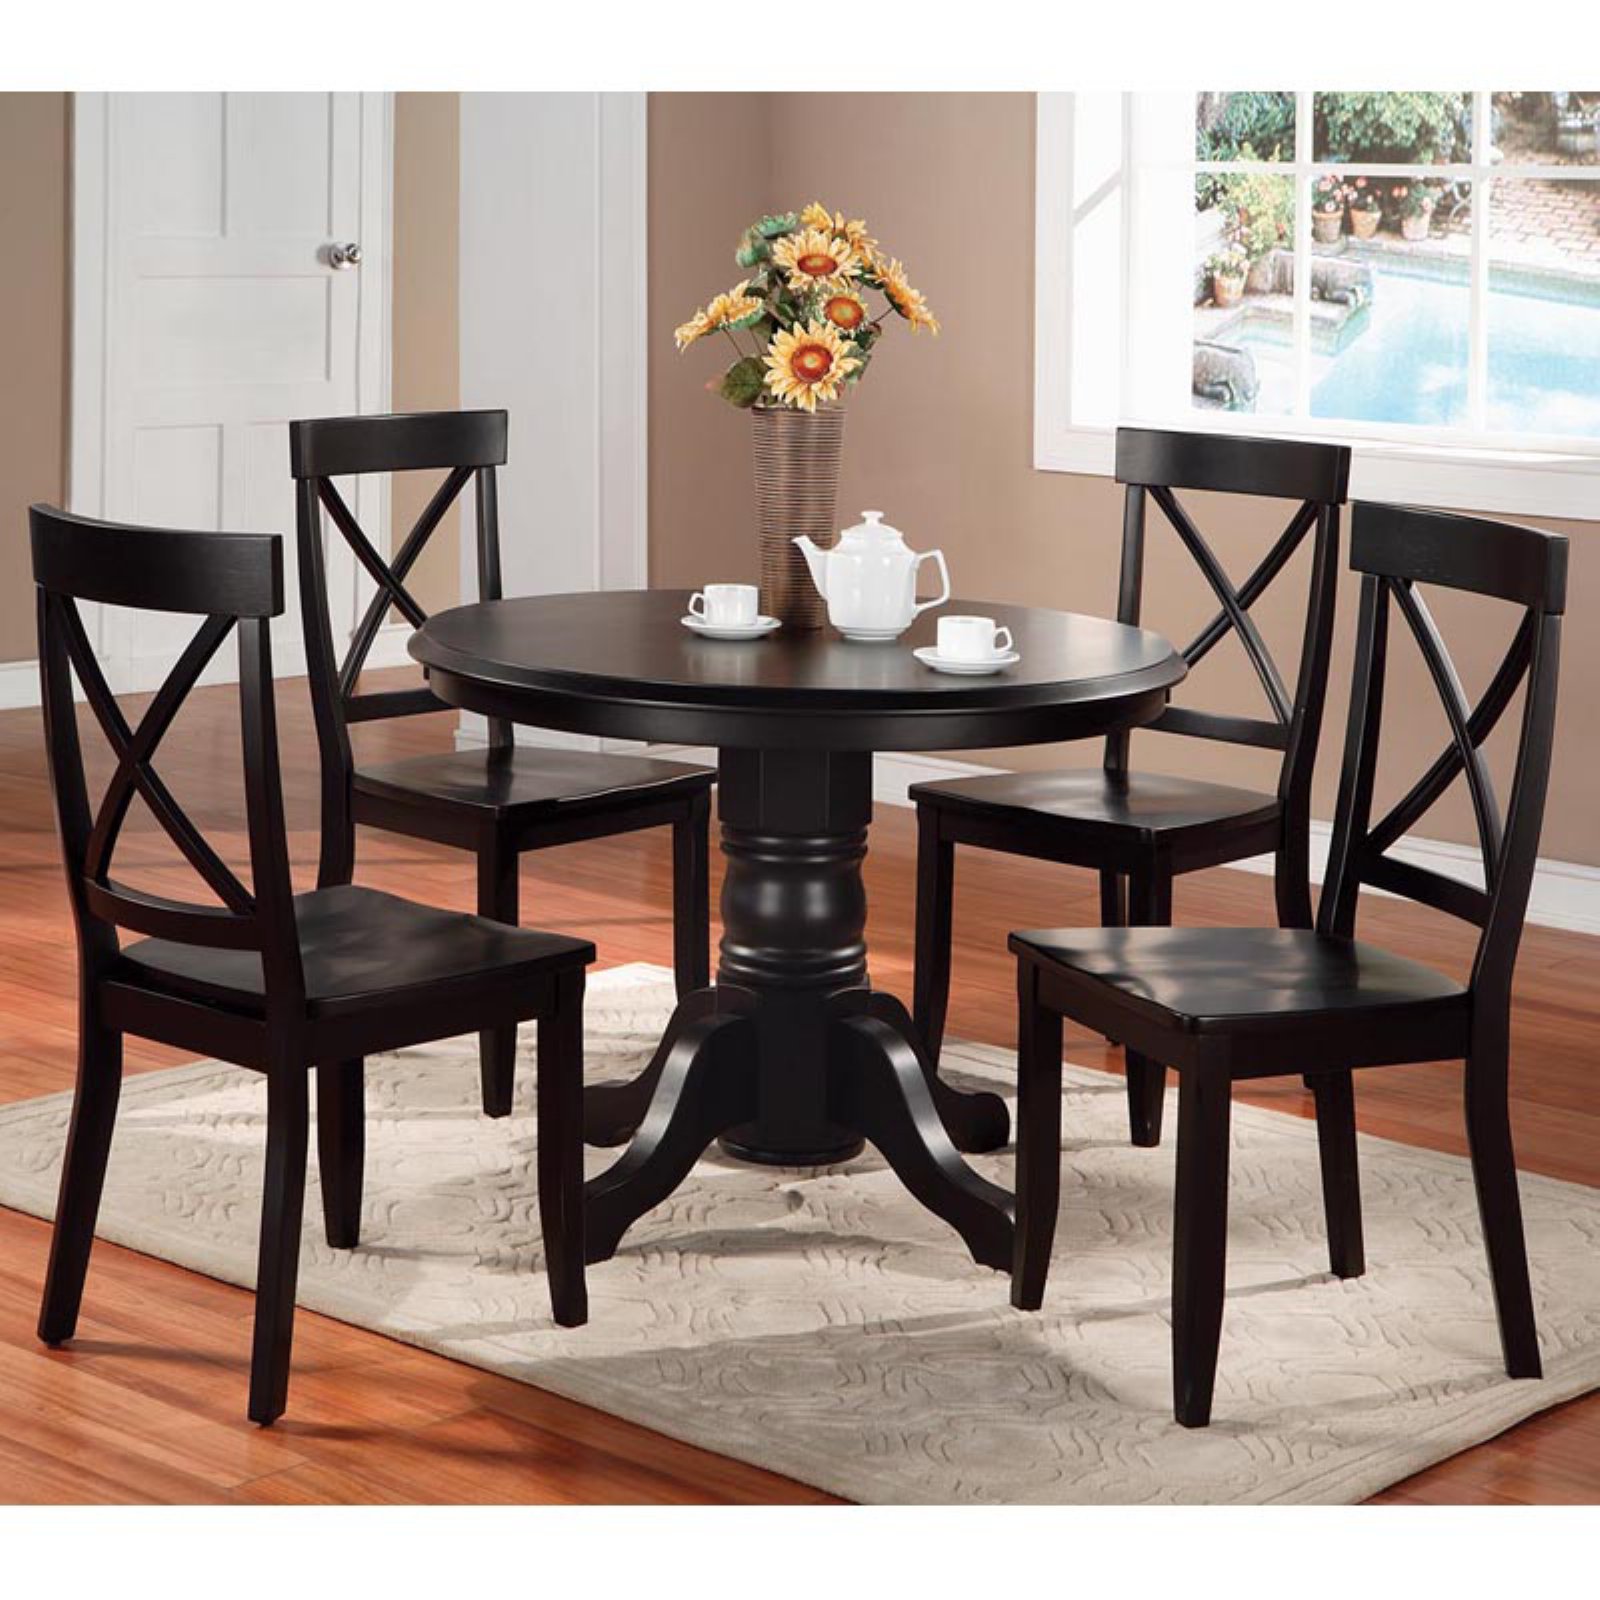 Homestyles 5 Piece Wood Dining Set with Pedestal Table in Black - image 1 of 3